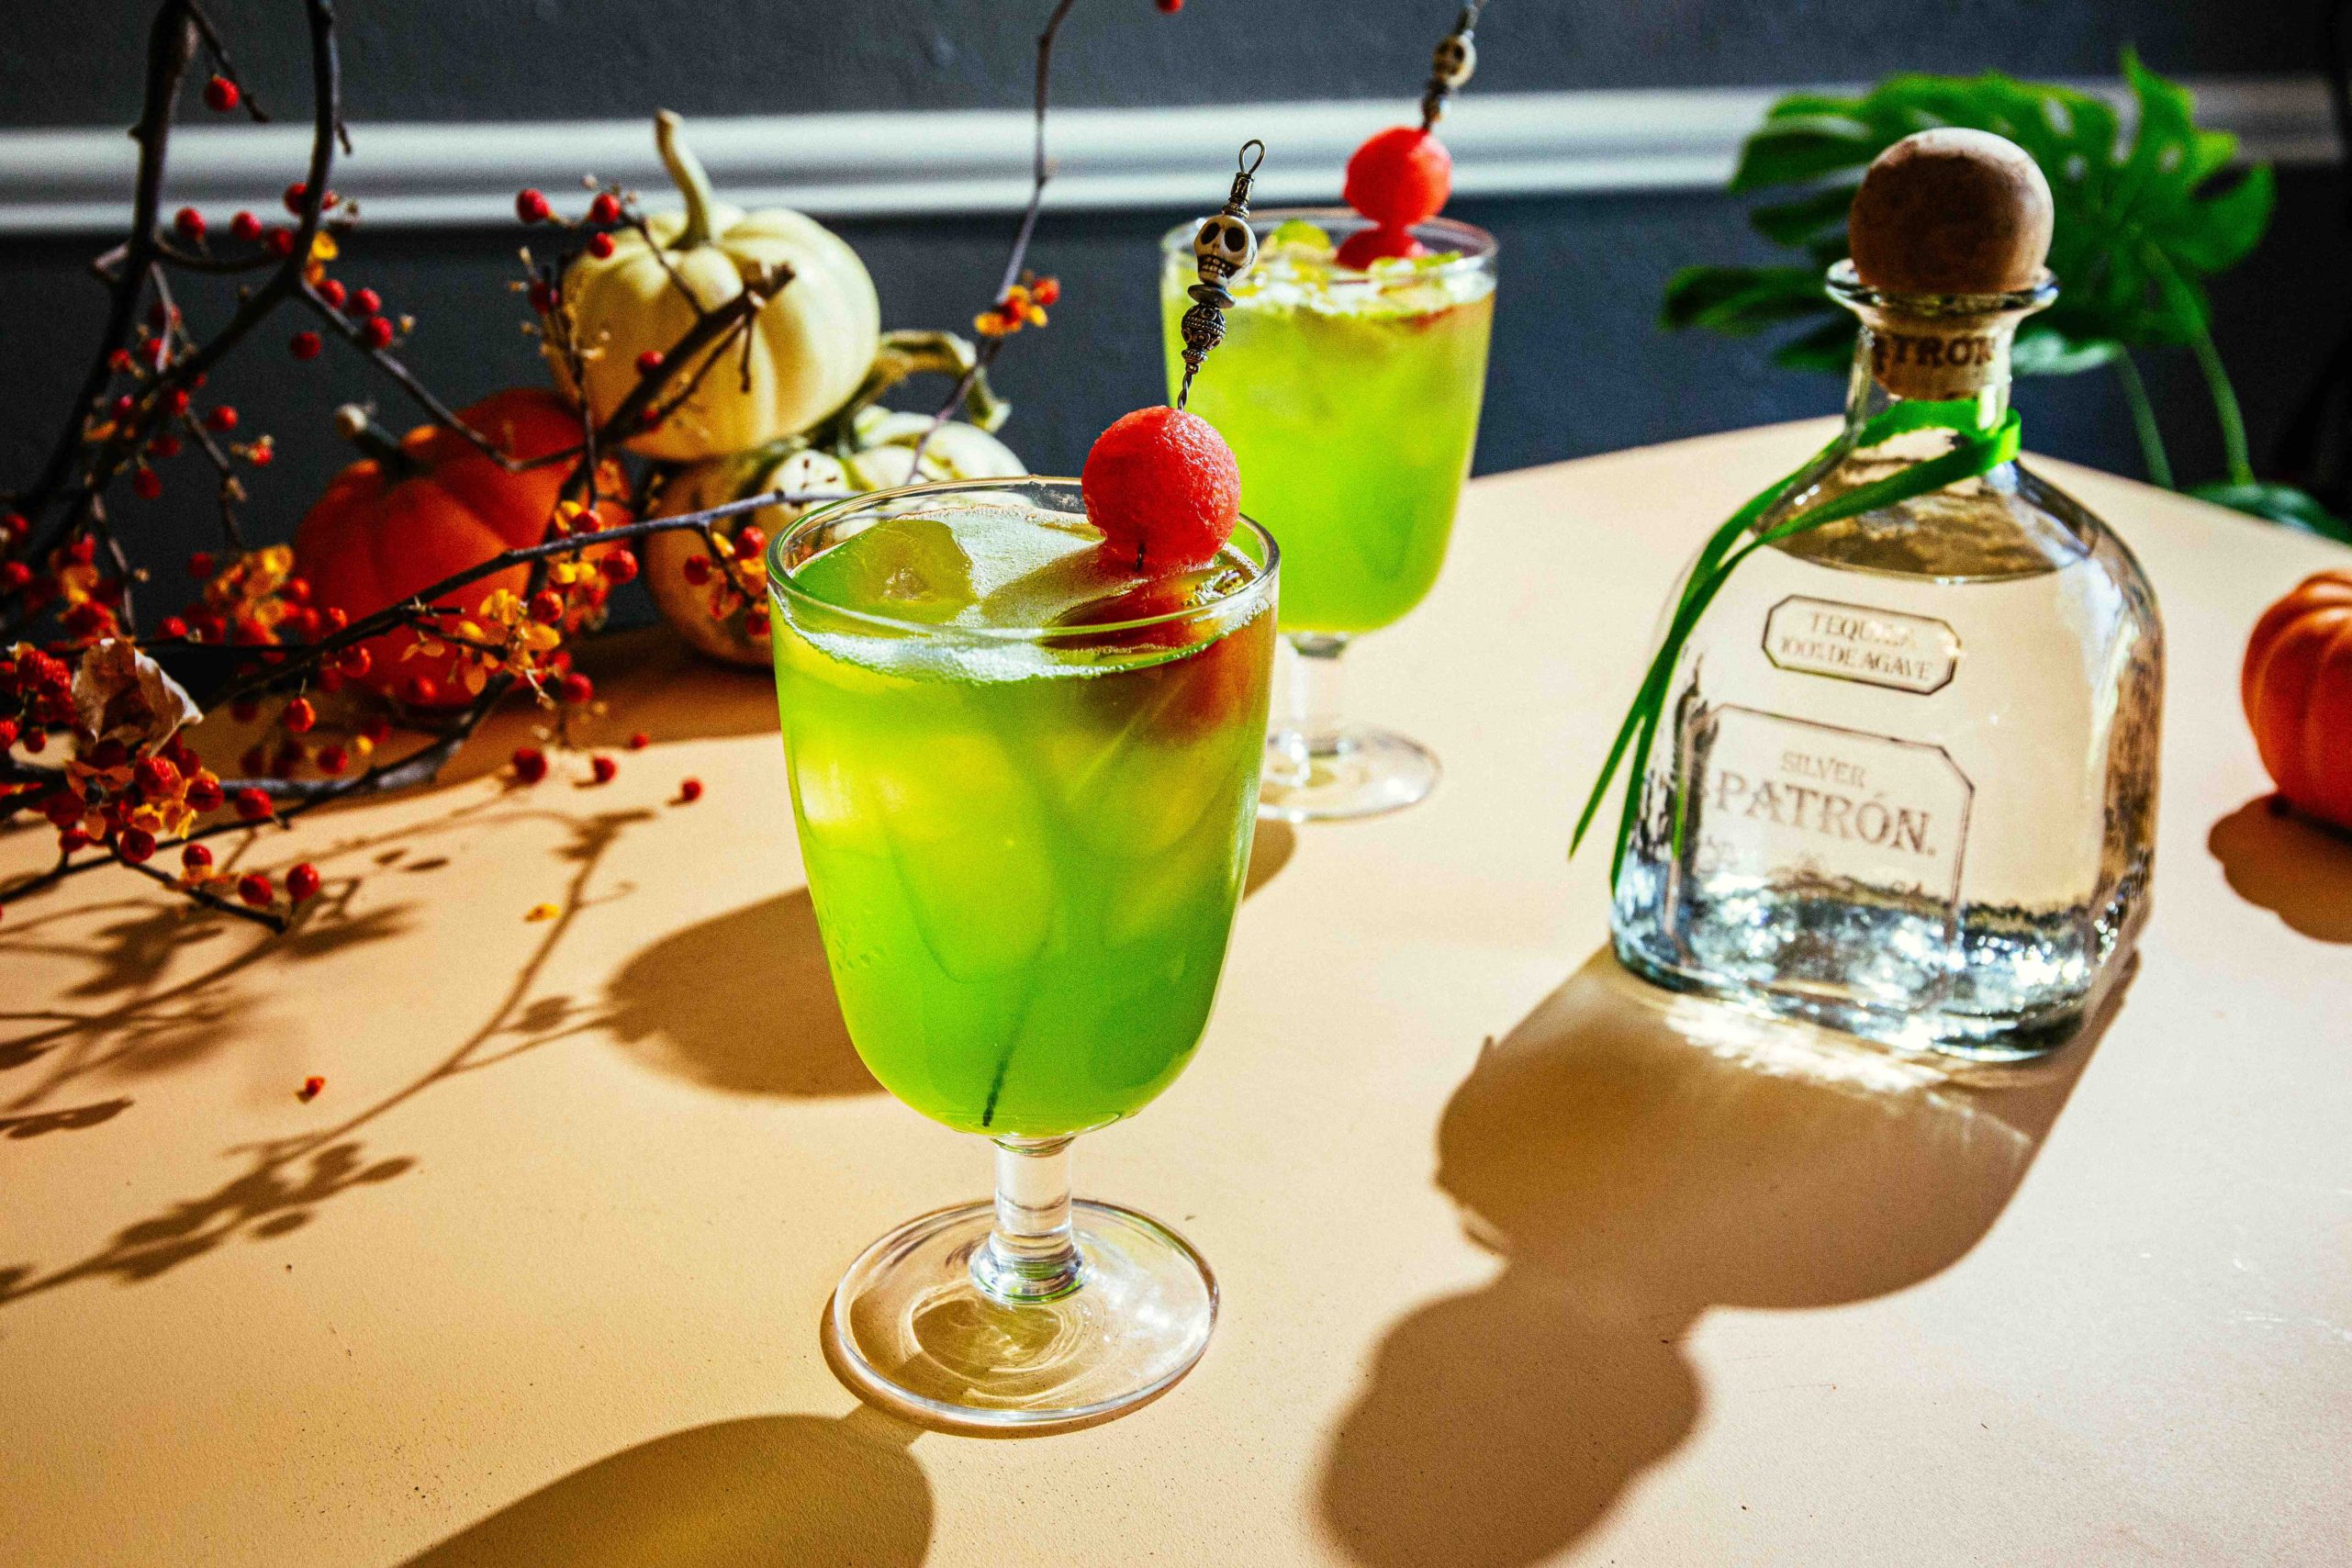 Take Your Día de los Muertos, or Day of the Dead Celebration Up A Notch With These Delicious Tequila Cocktails